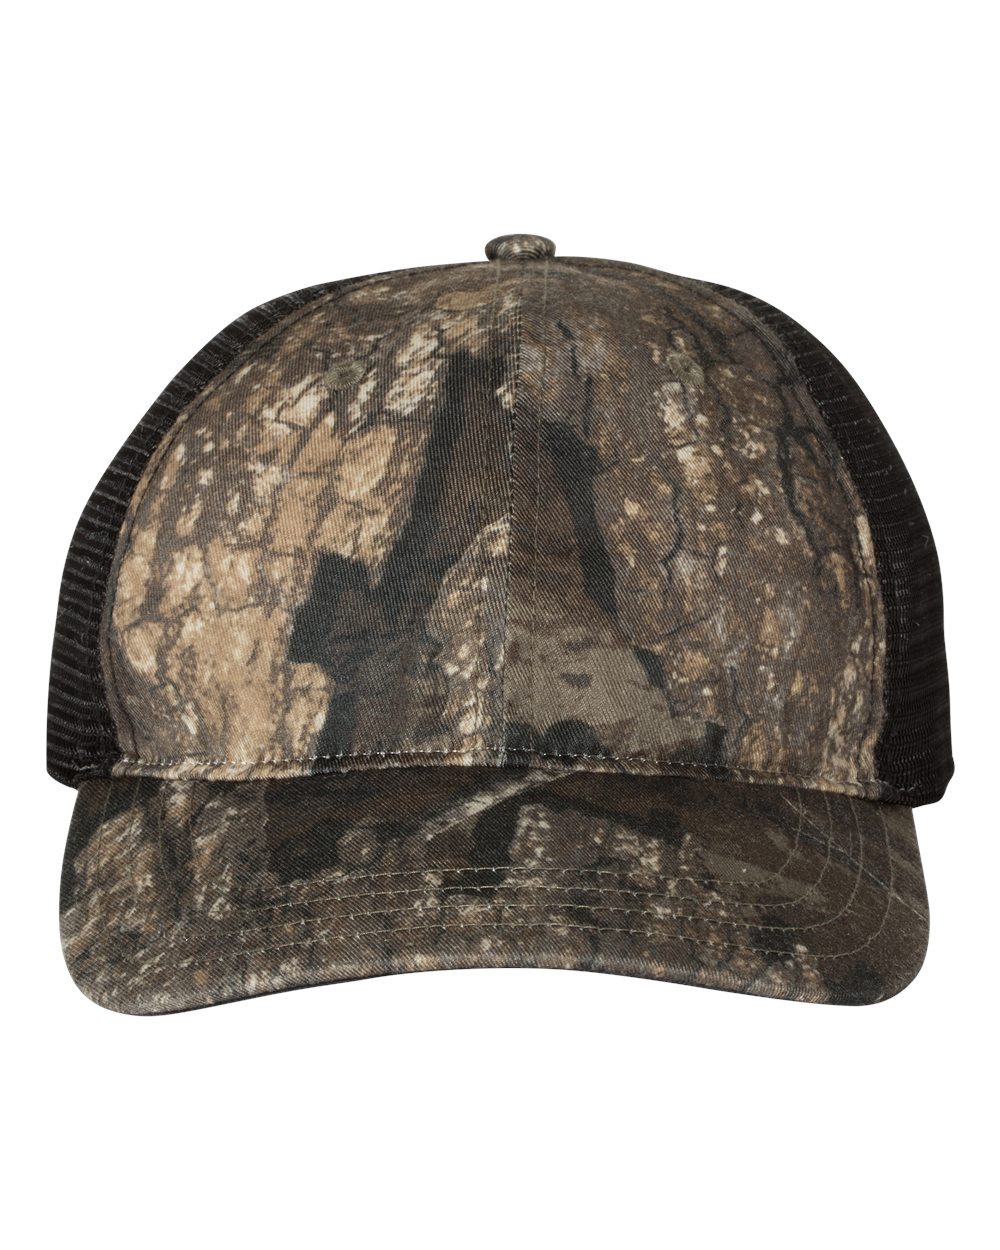 click to view Realtree Timber/Black